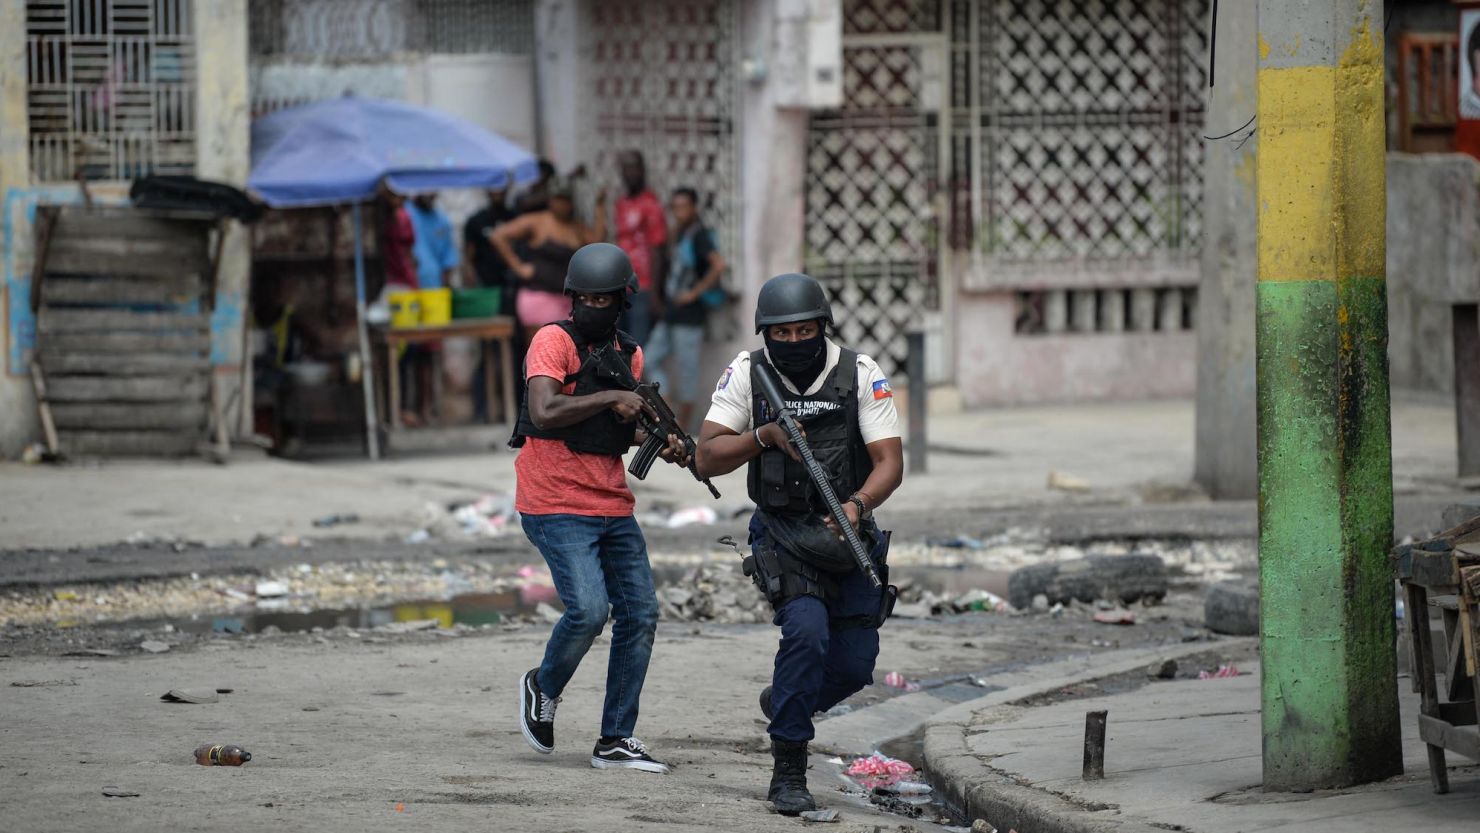 Warring gangs control much of Haiti's capital city and main port.